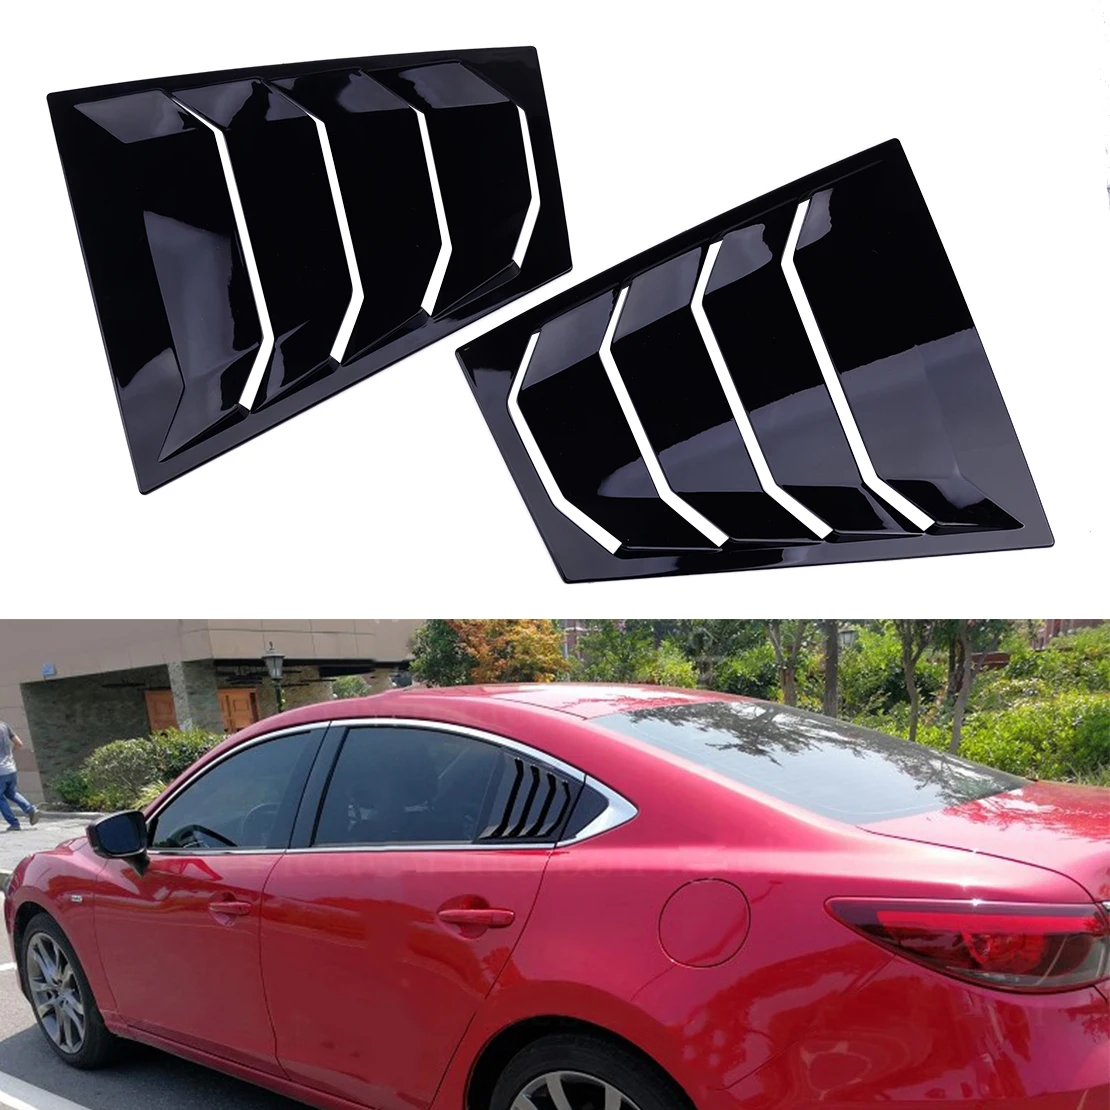 

beler Auto Rear Side Window Quarter Panel Louvers Vent Scoop Fit For Mazda 6 ATENZA 2014 2015 2016 2017